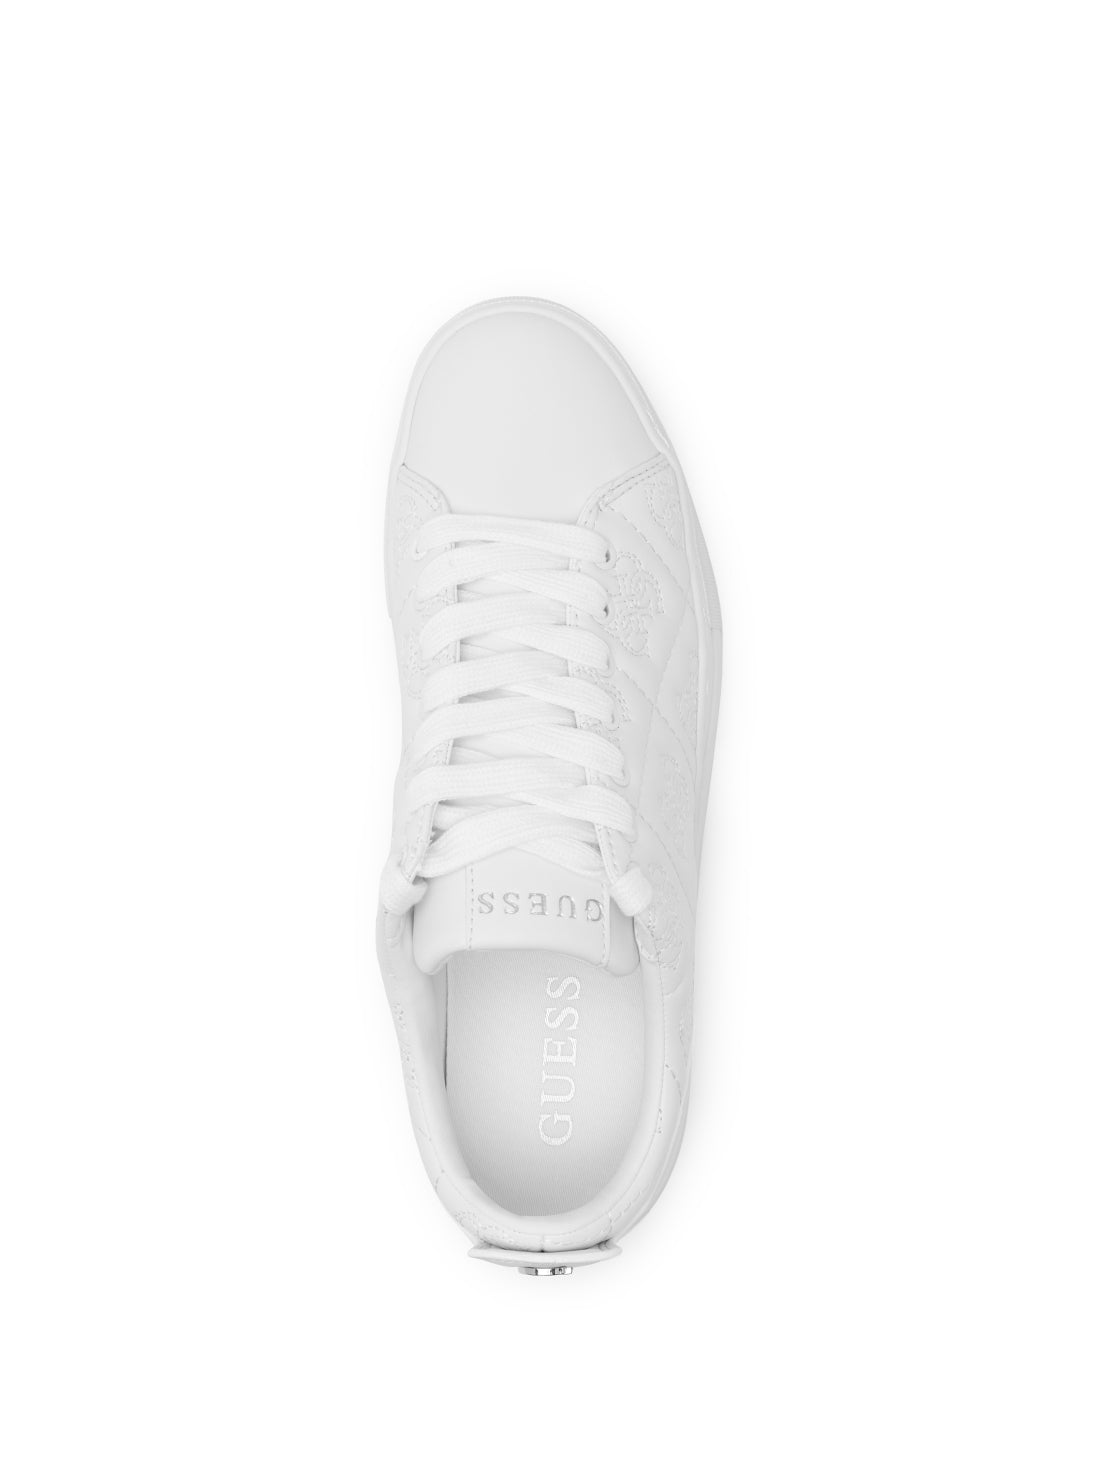 guess womens White Quilted Quattro G Gianele Low-Top Sneakers front upper view